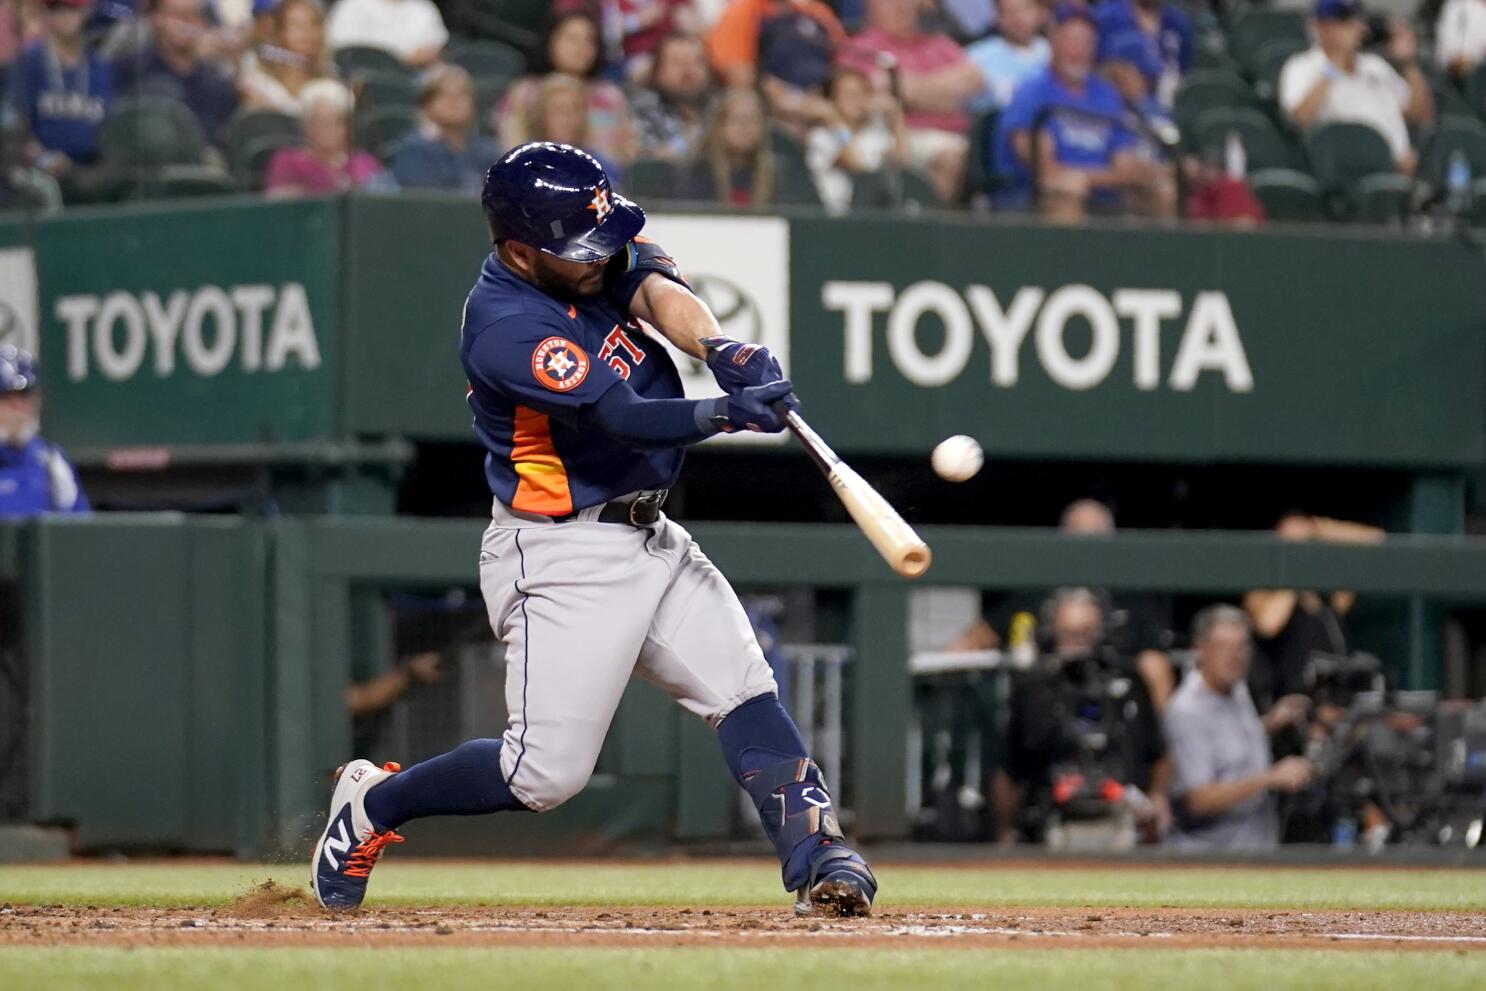 Altuve reaches base twice in final rehab appearance